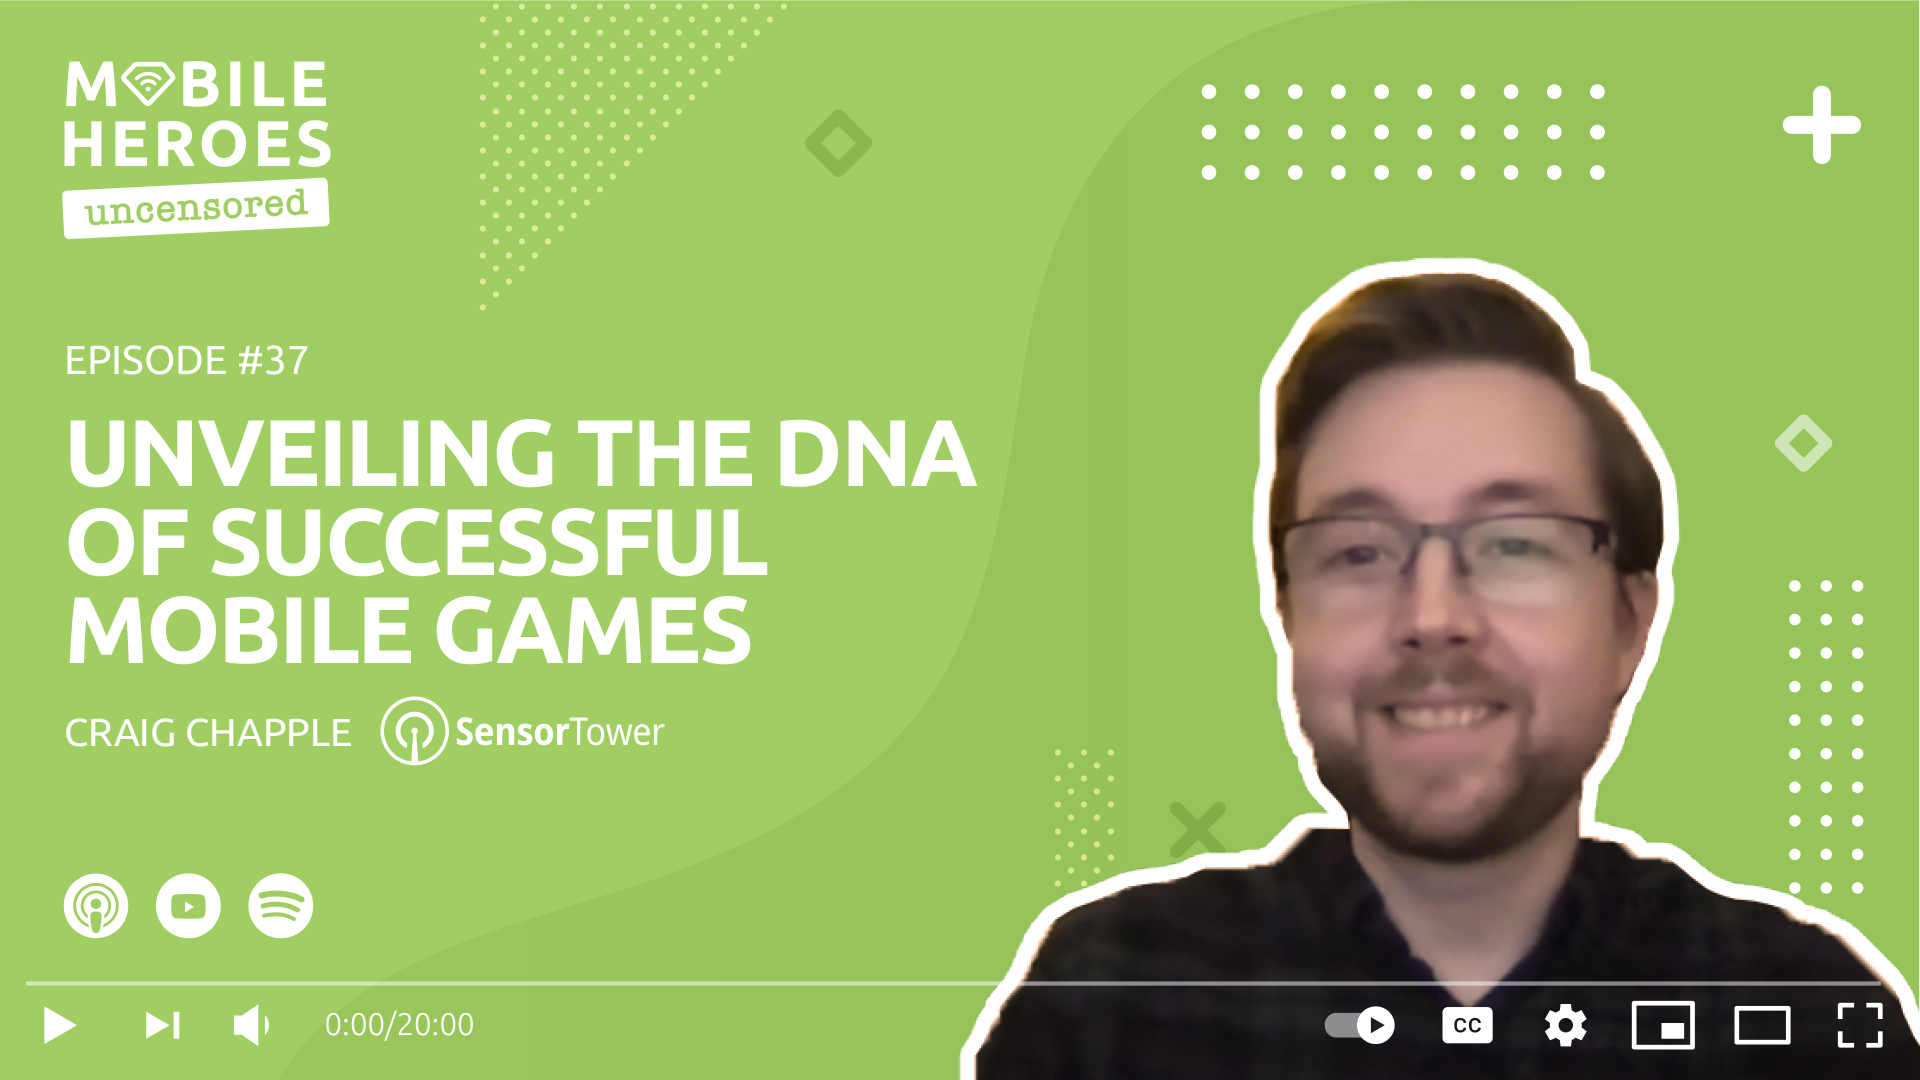 Episode #37: Unveiling the DNA of Successful Mobile Games